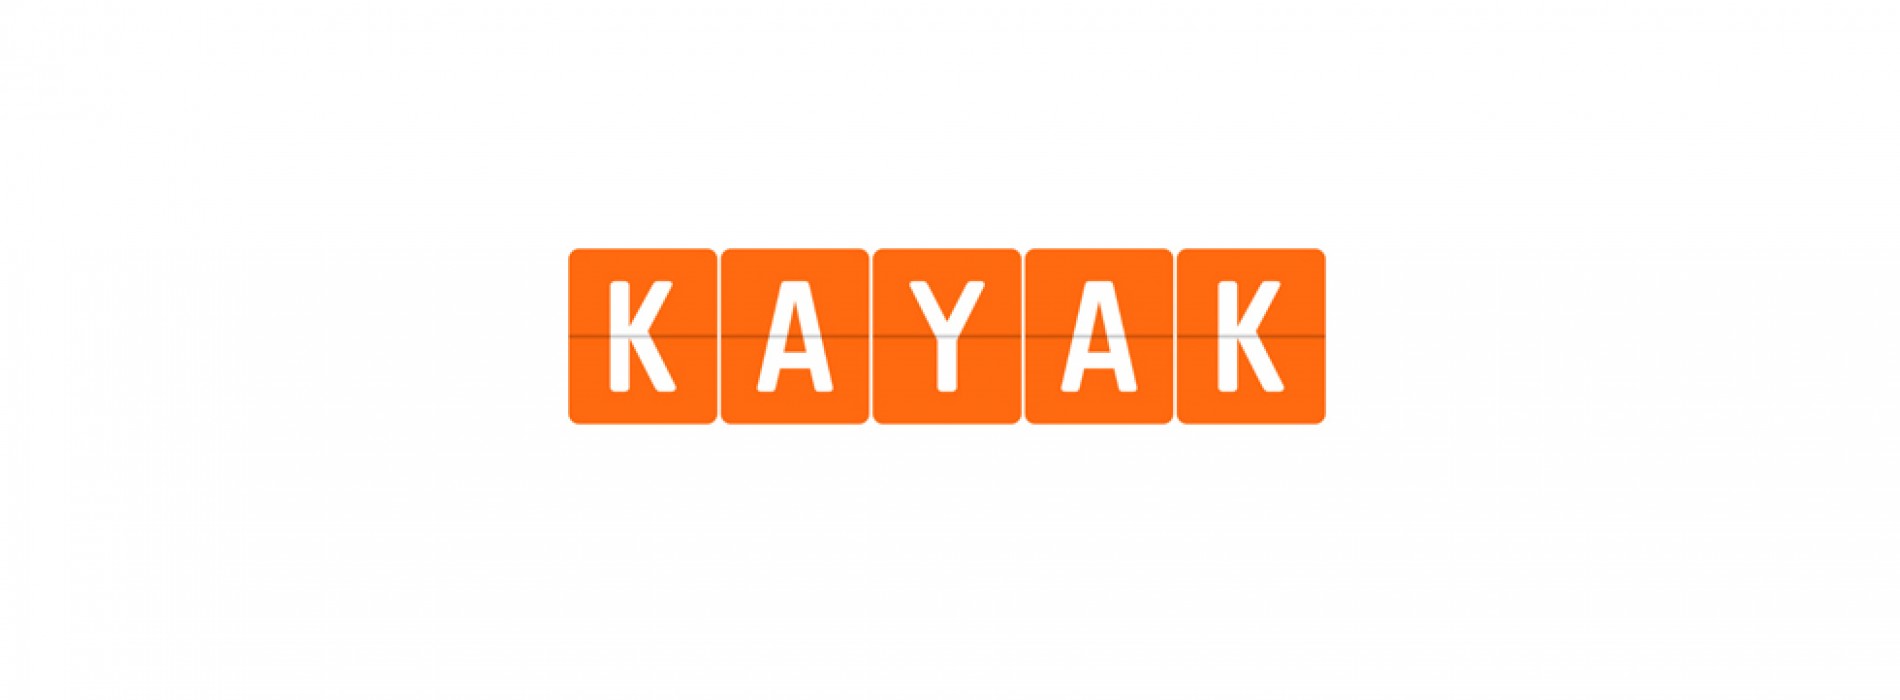 Travel search engine Kayak officially enters Indian market